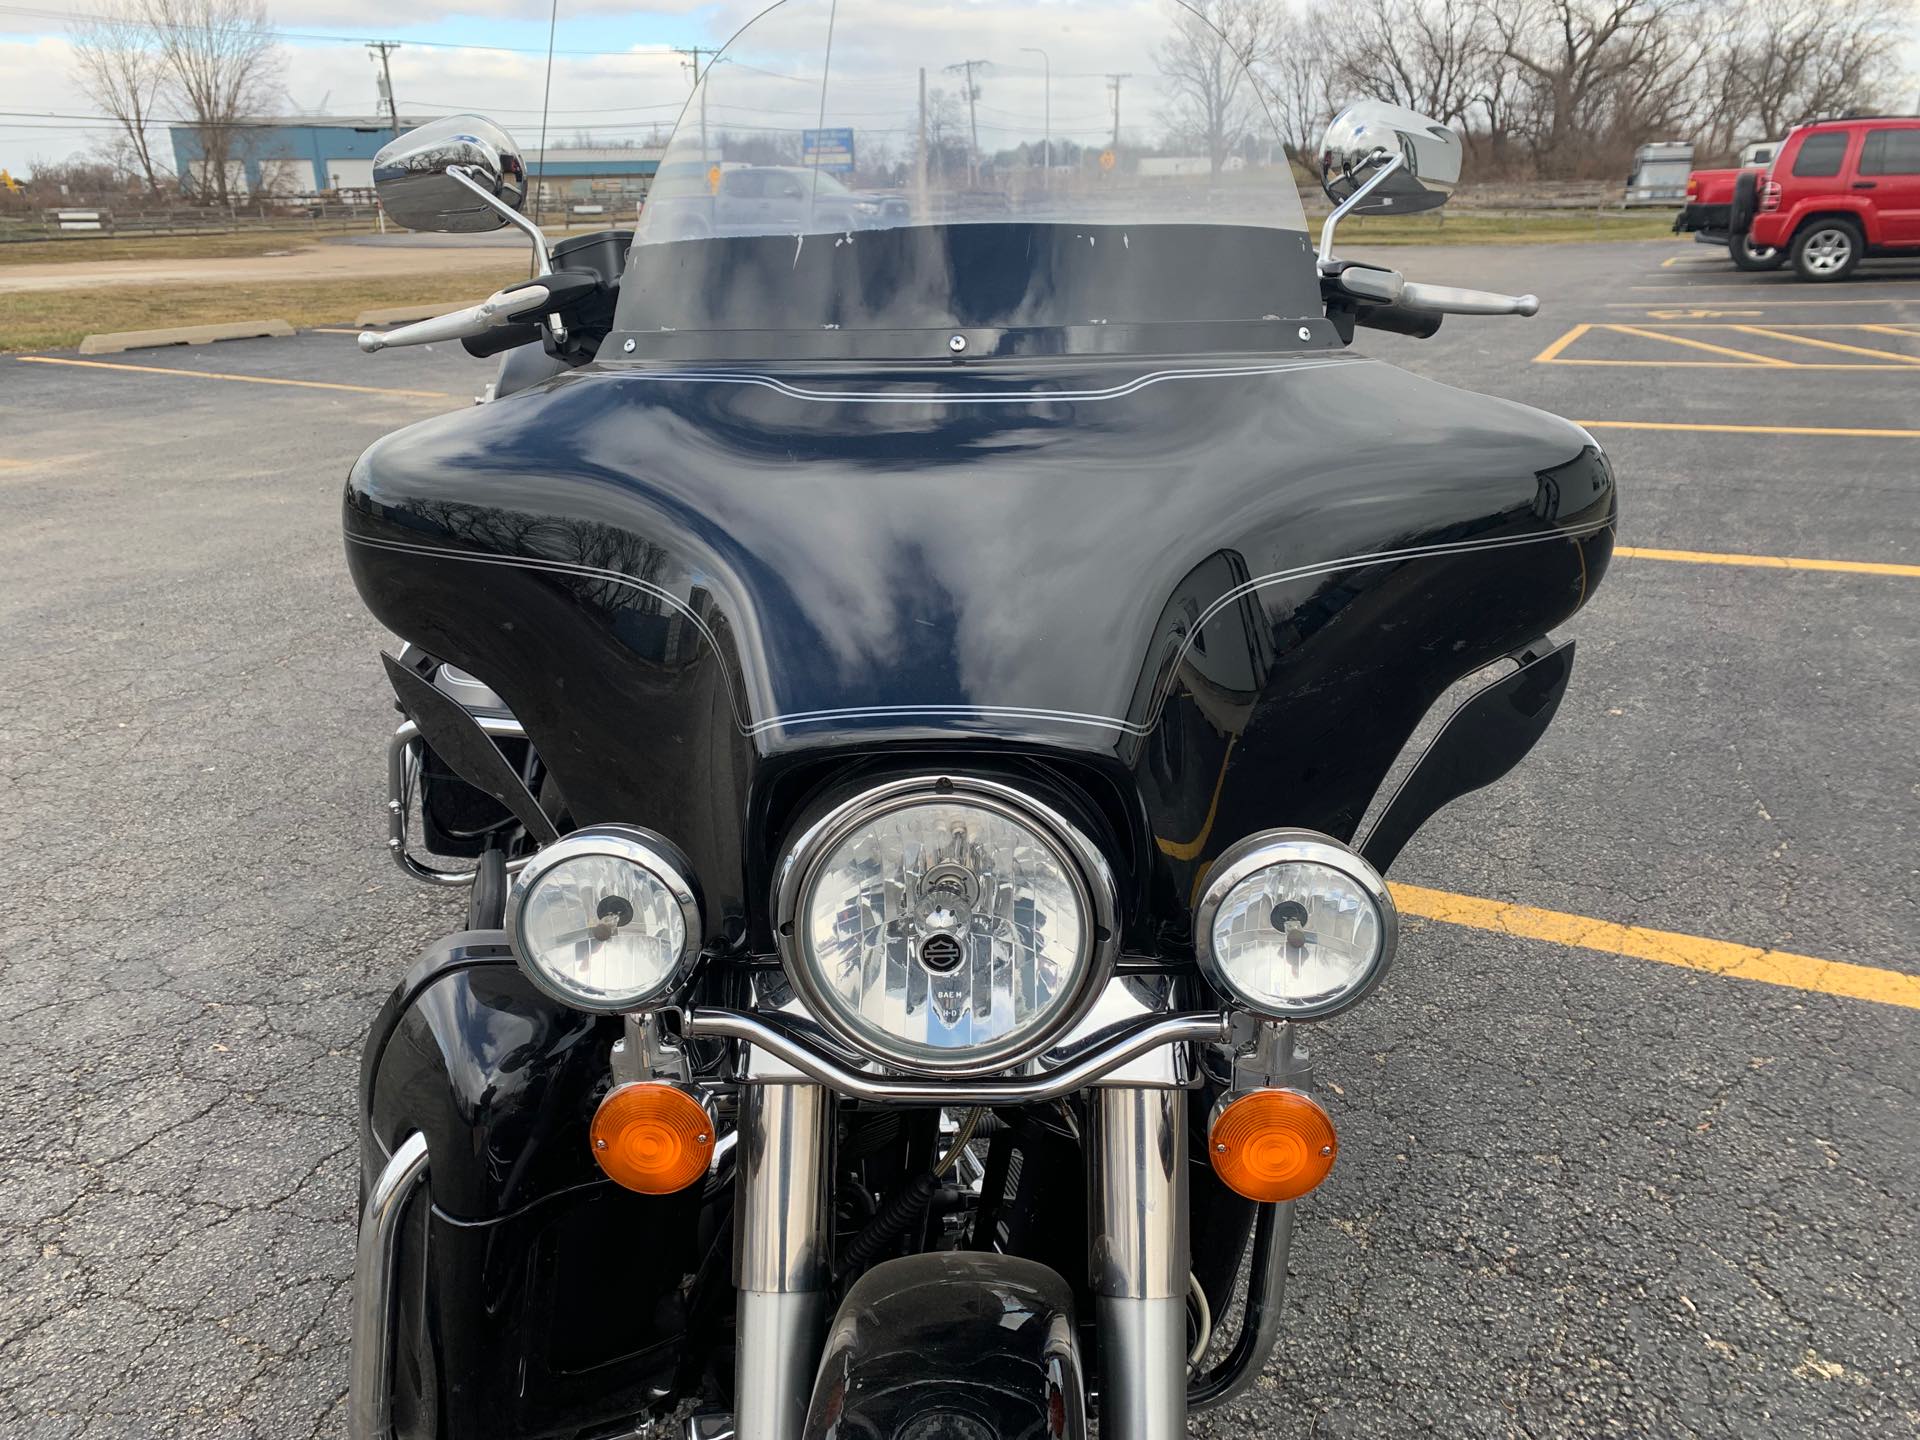 2010 Harley-Davidson Electra Glide Ultra Classic at Randy's Cycle